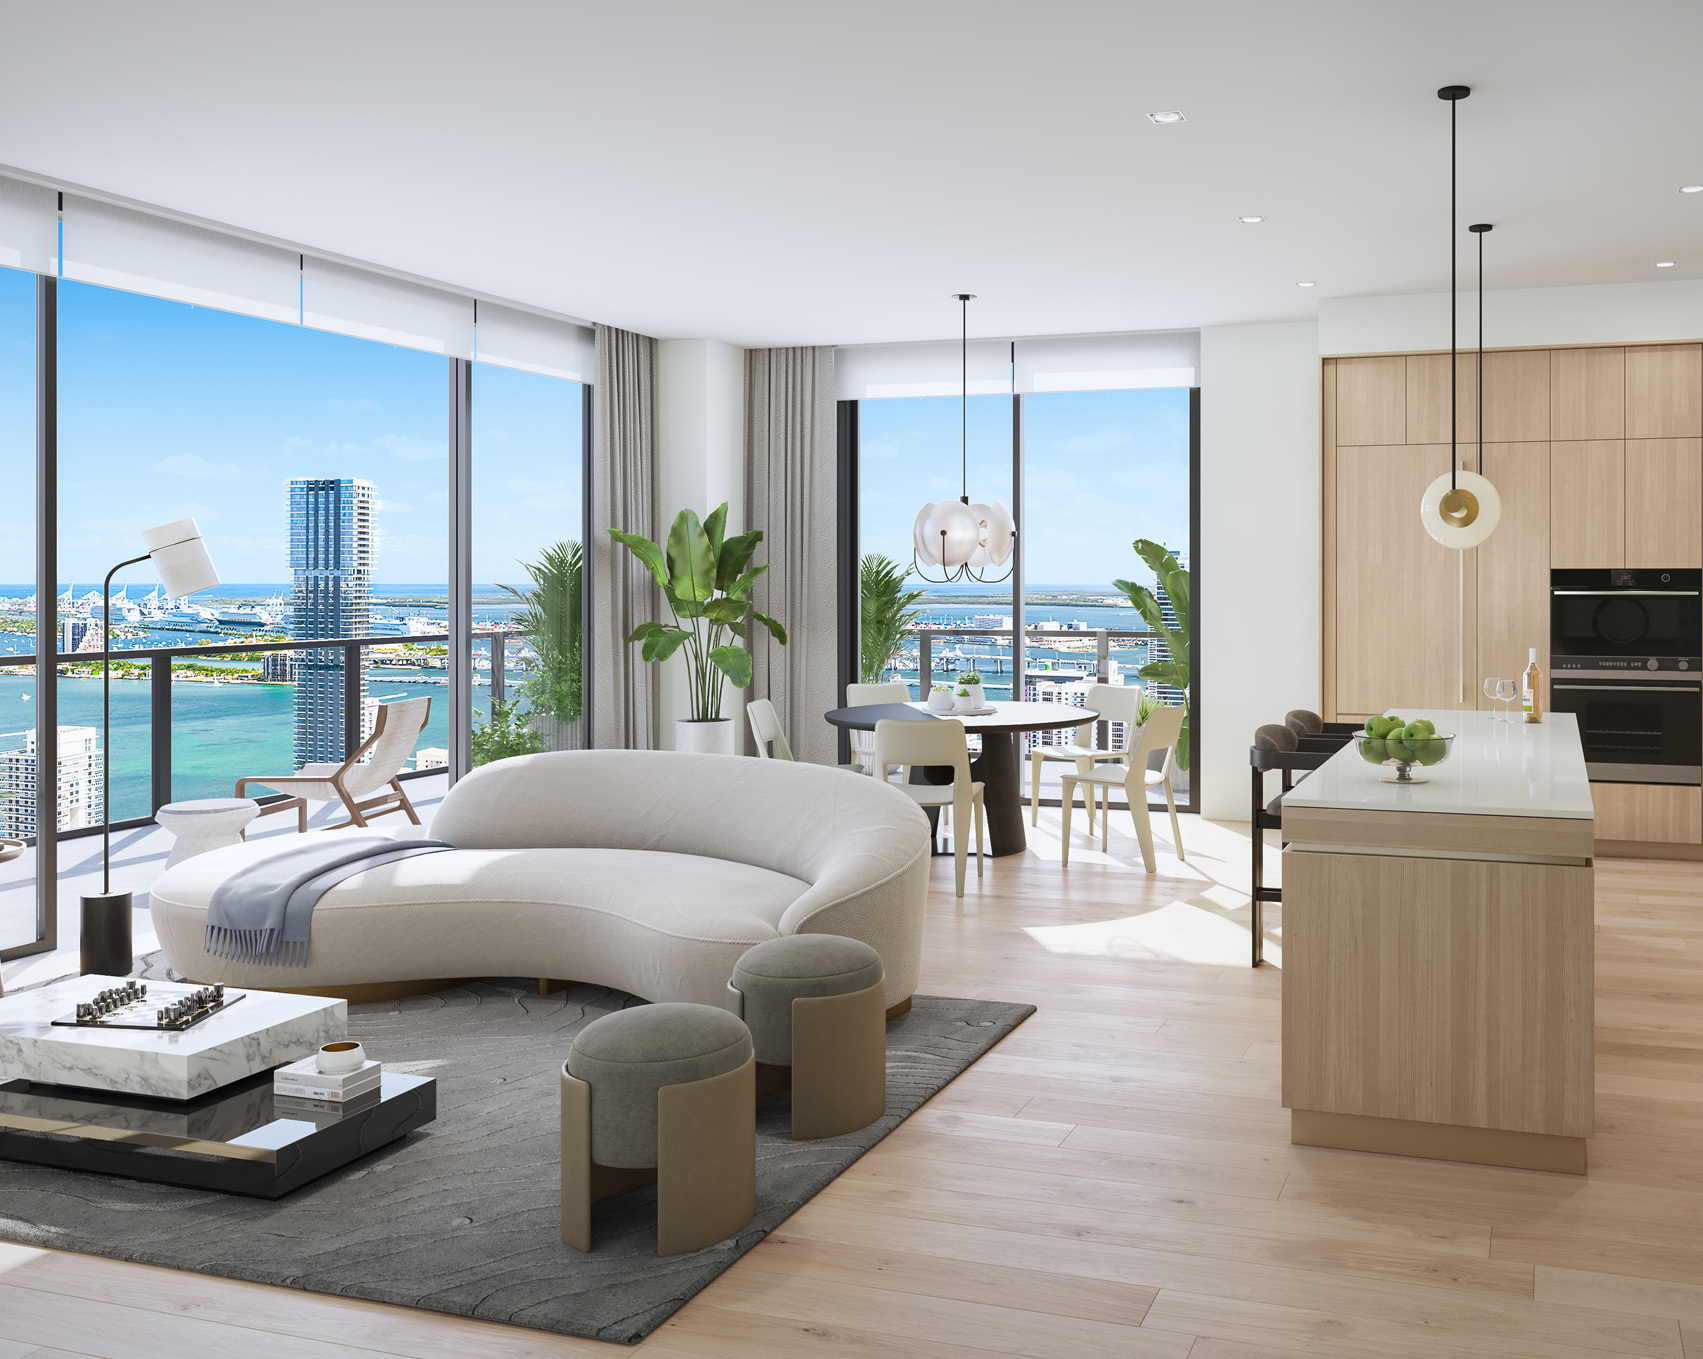 Living room, kitchen, and dining room of a penthouse at Forma Miami. Open layout with premium features and skyline views.